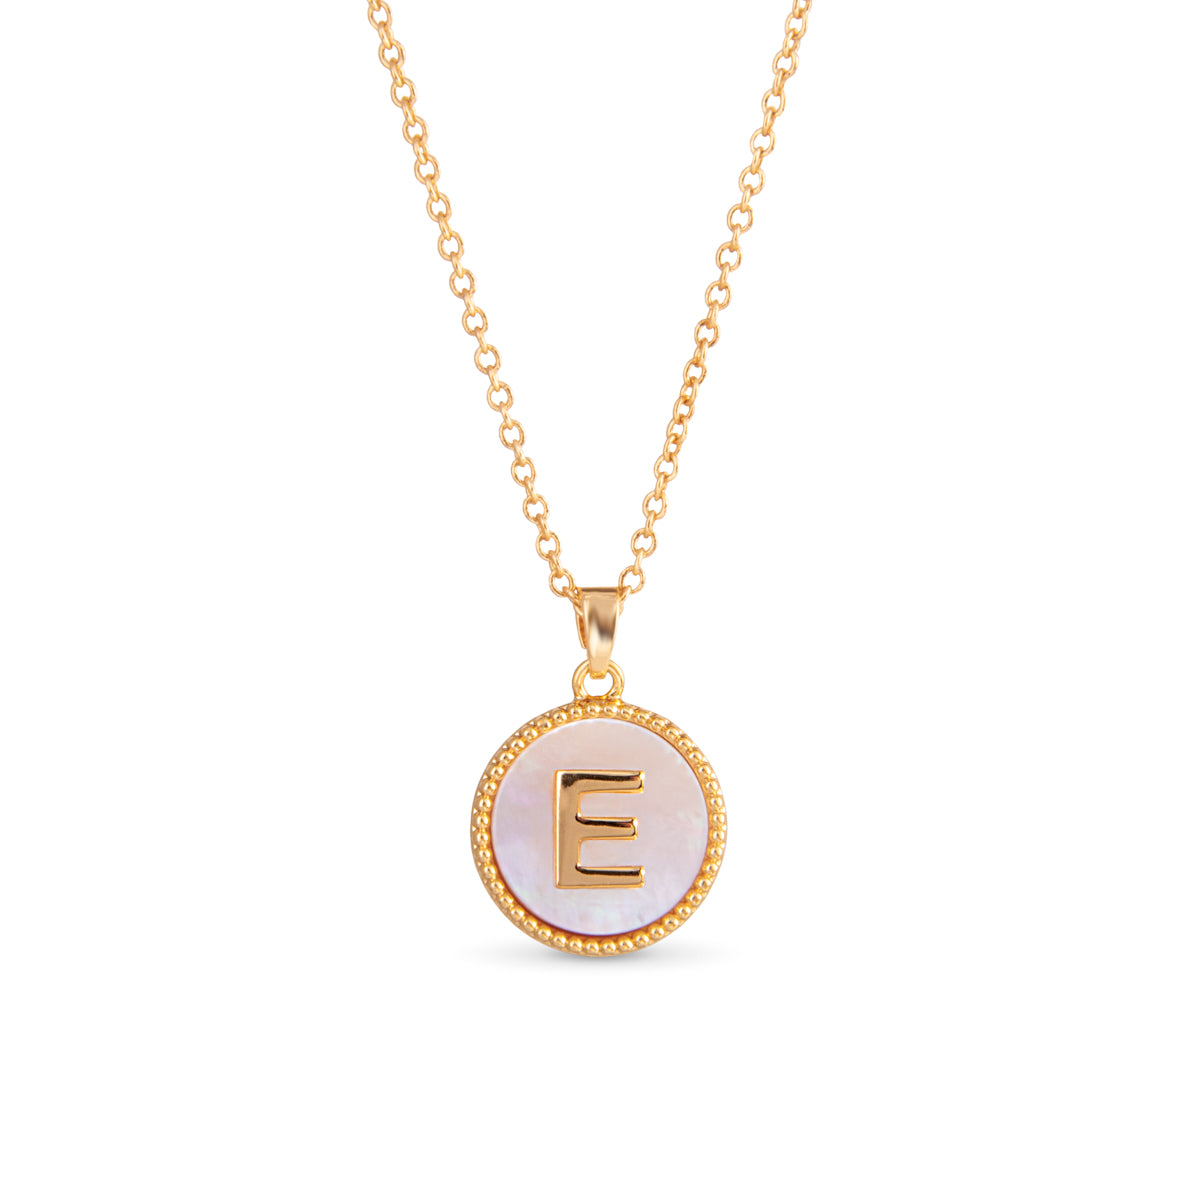 Gold Mother of Pearl Initial Necklace - E